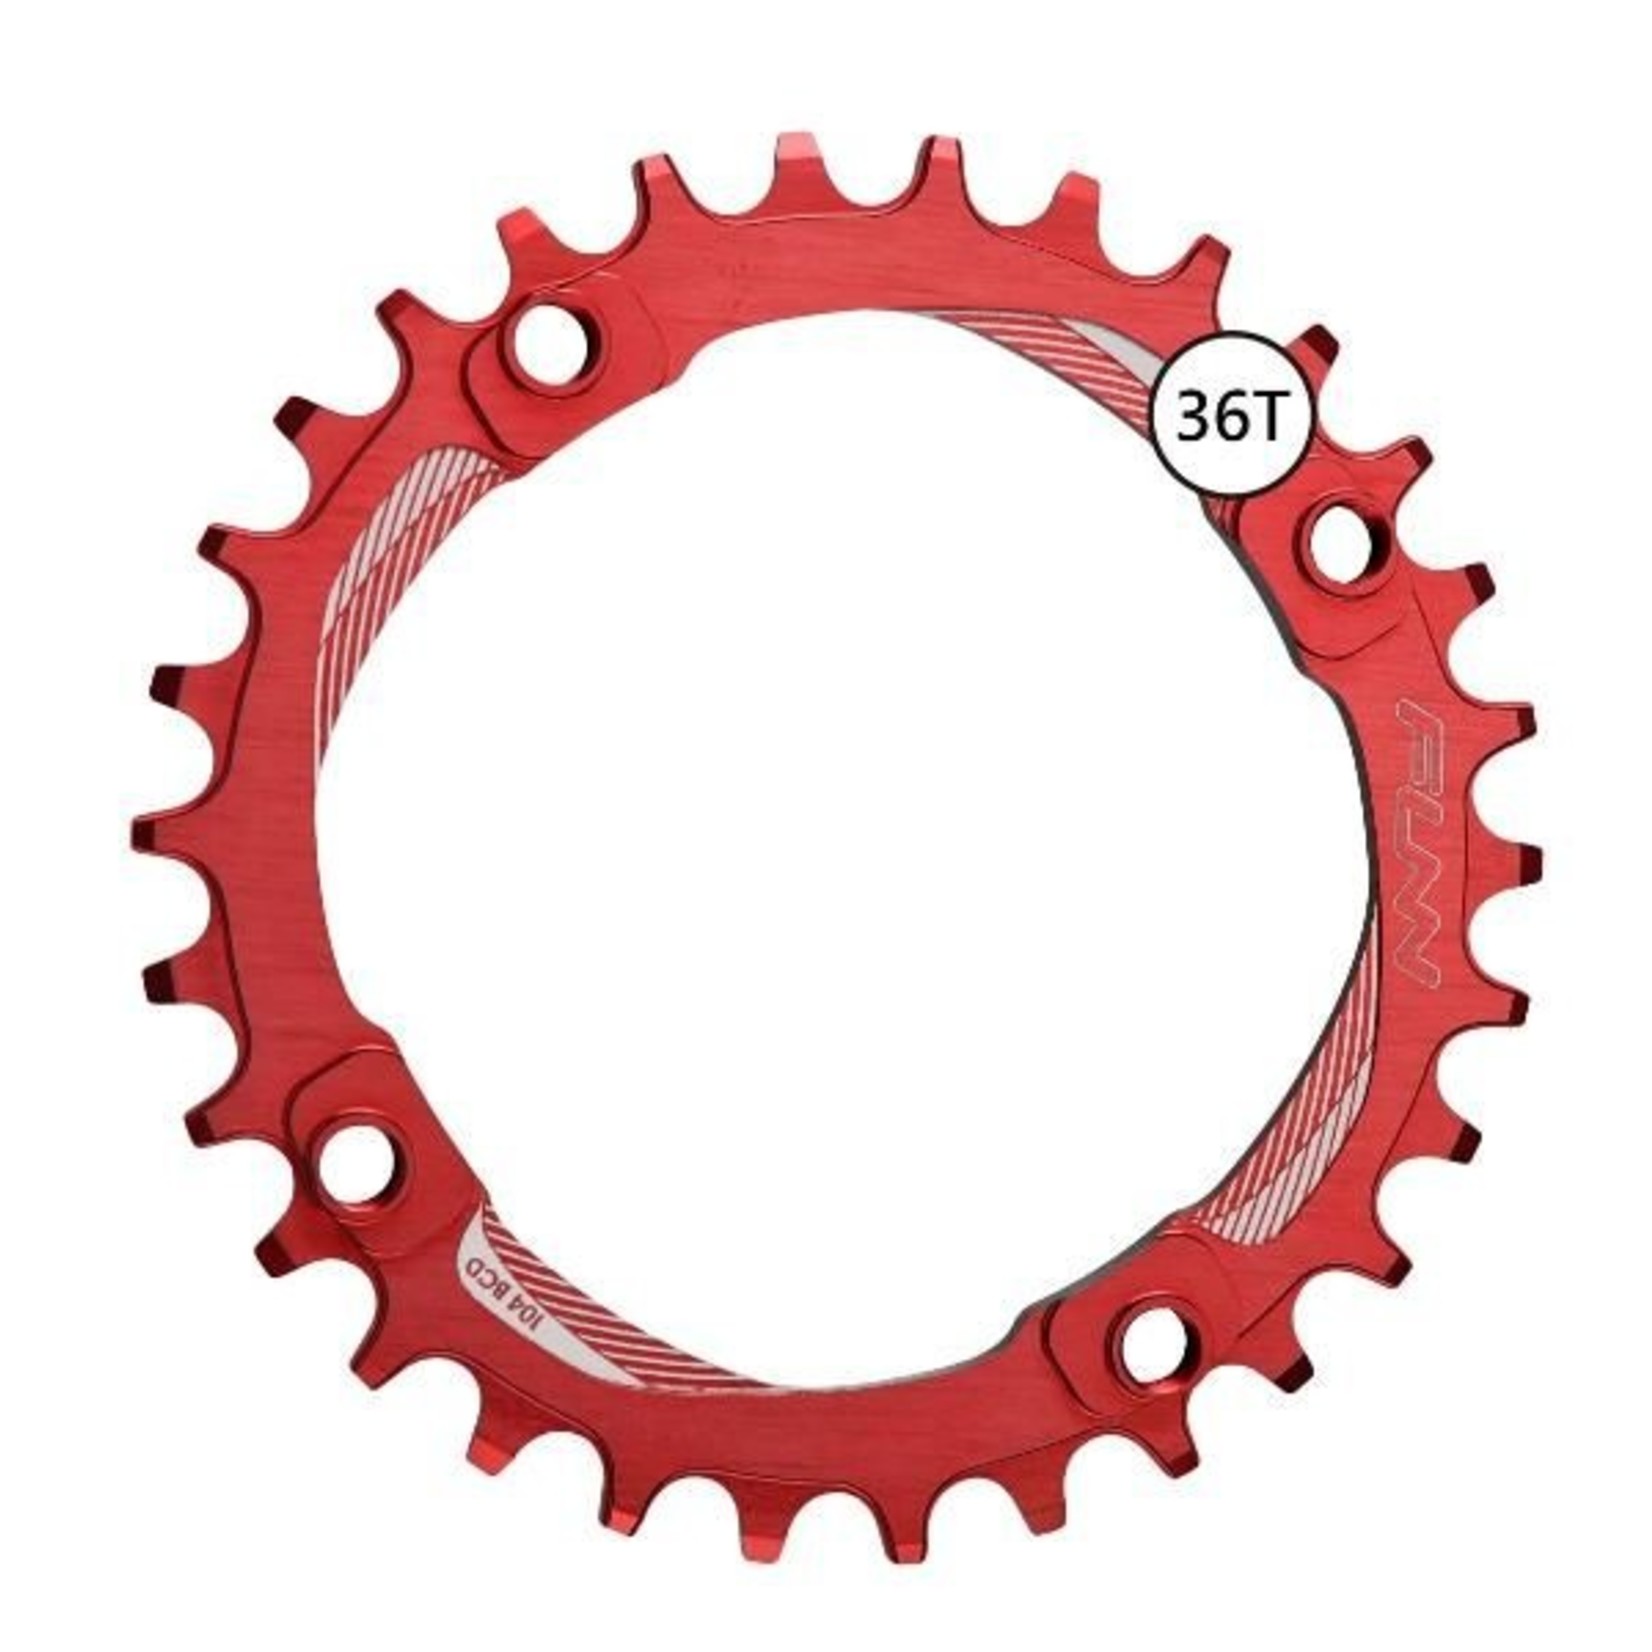 FUNN Funn Bicycle Chain Ring - Solo Narrow-Wide - 36T - 104mm BCD - Red